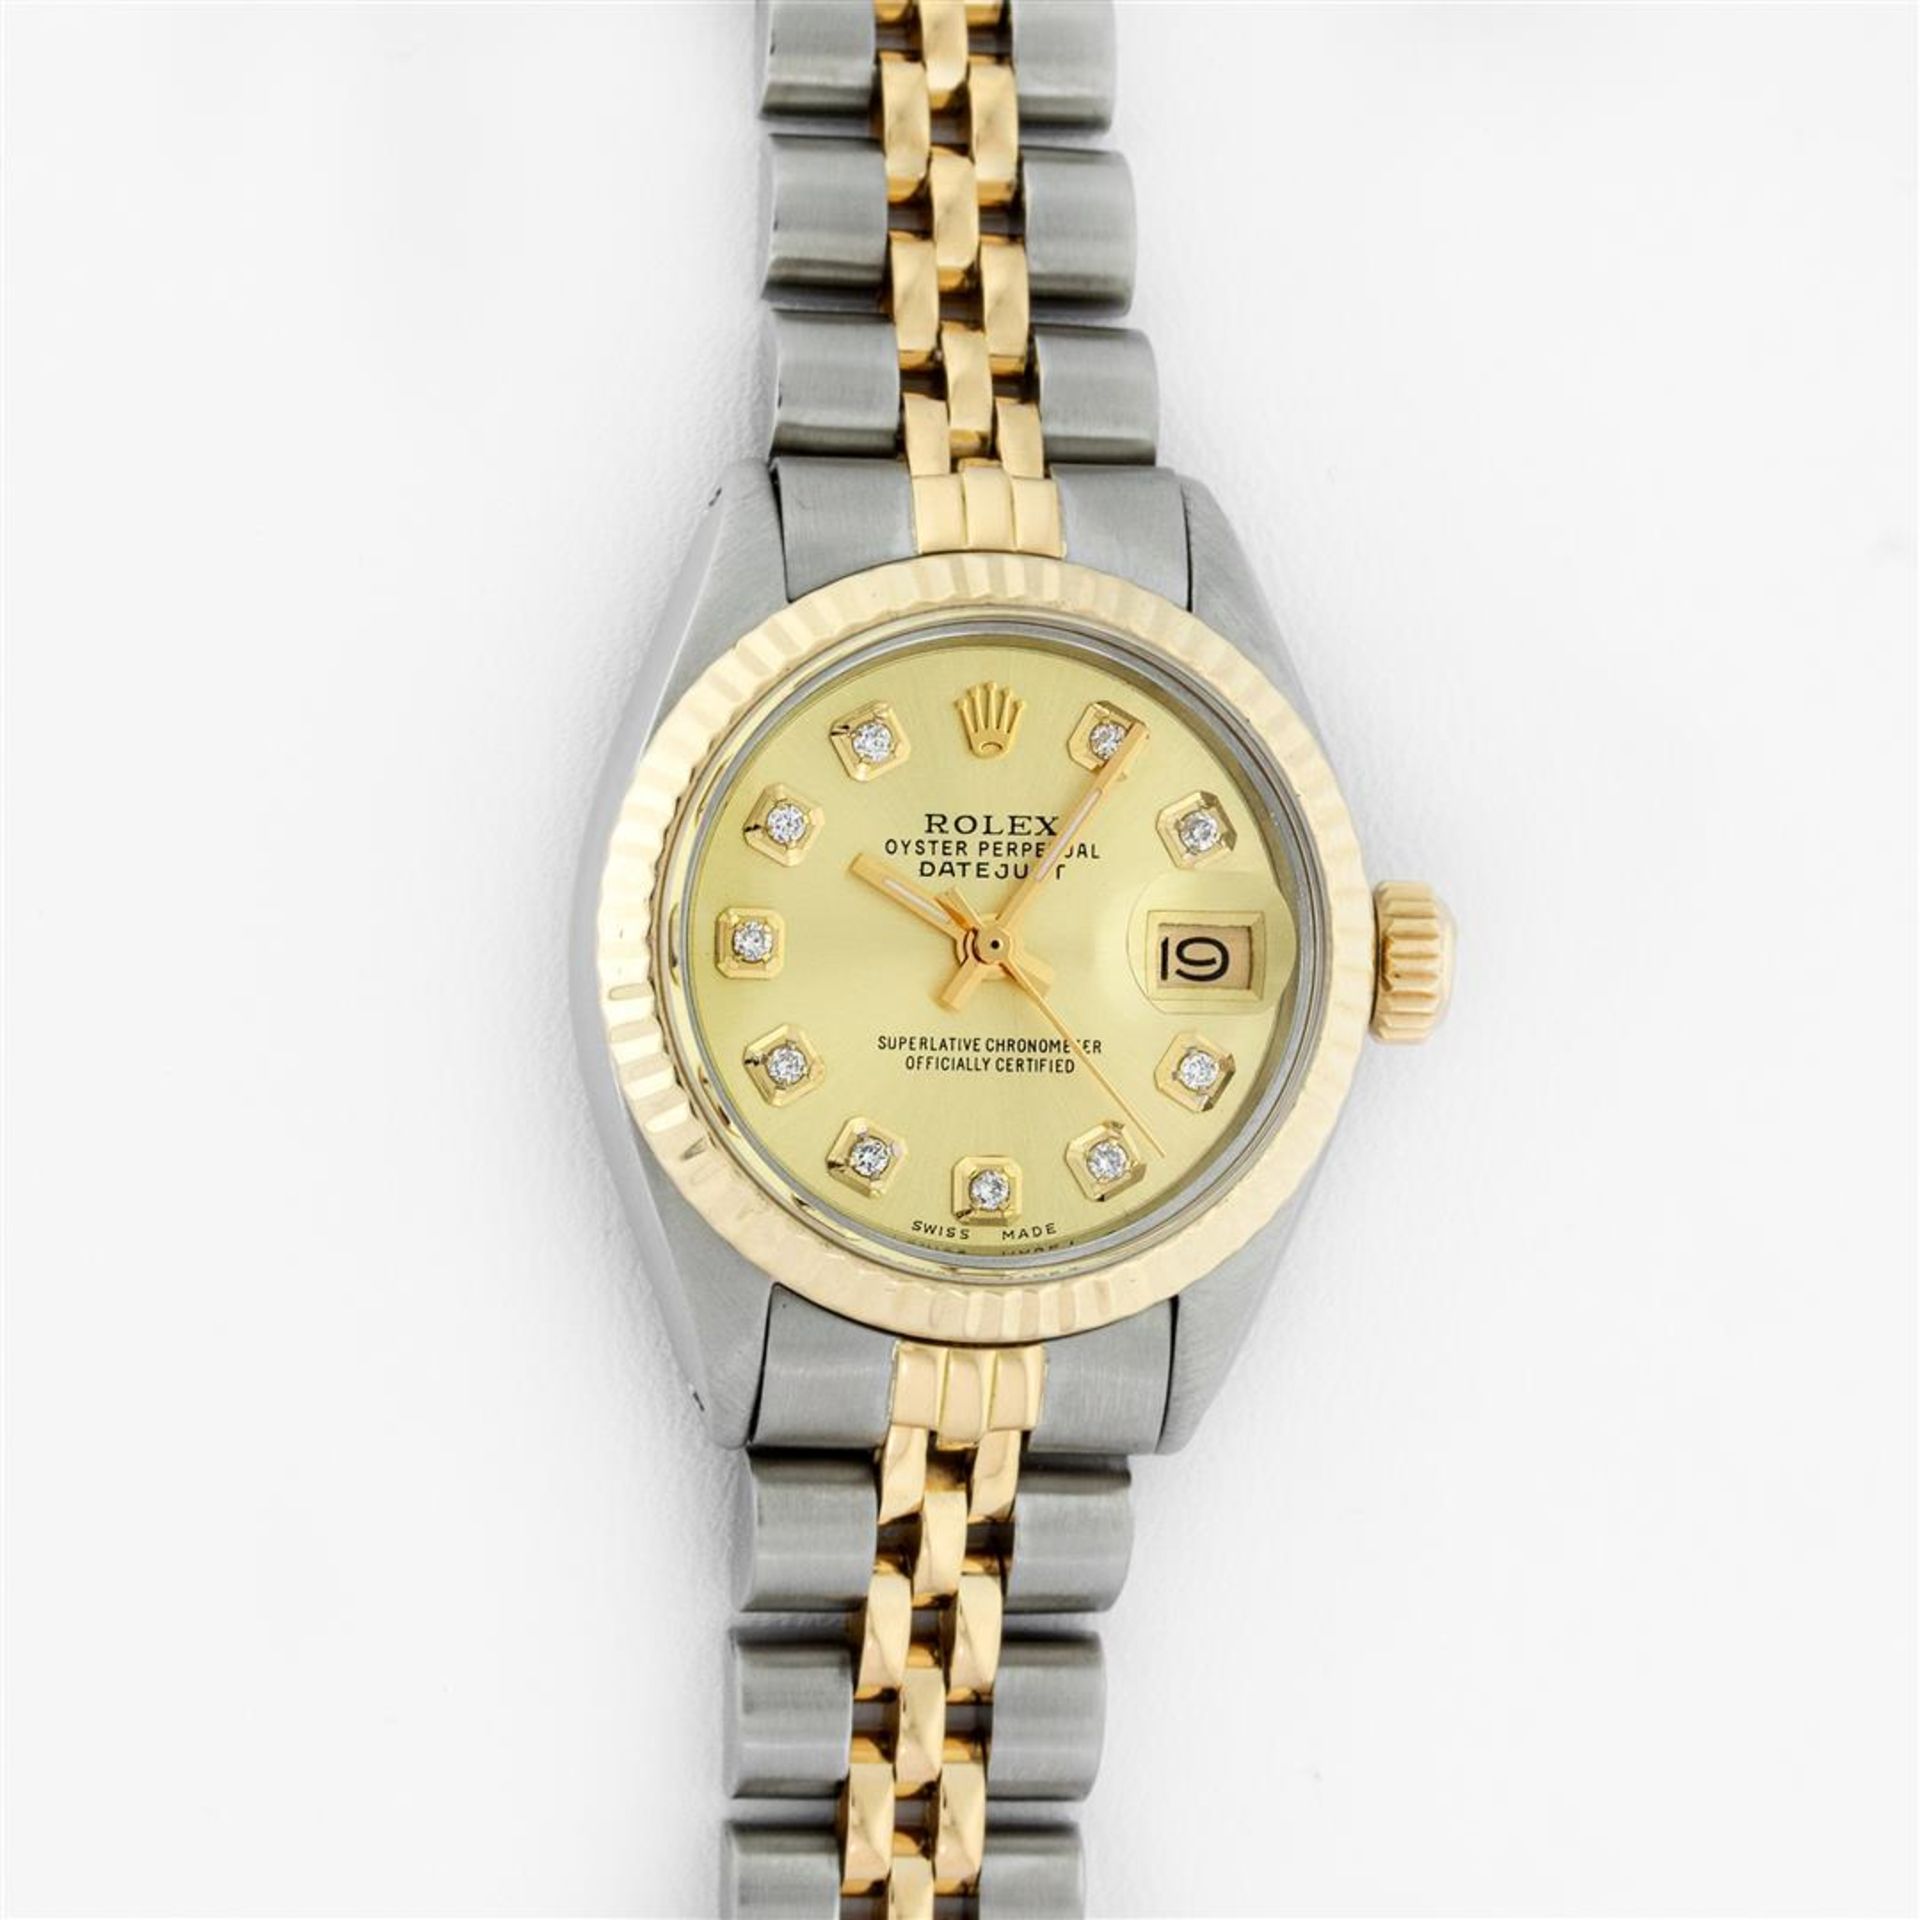 Rolex Ladies 2 Tone Champagne Diamond 26MM Oyster Perpetual Datejust Wristwatch - Image 2 of 9